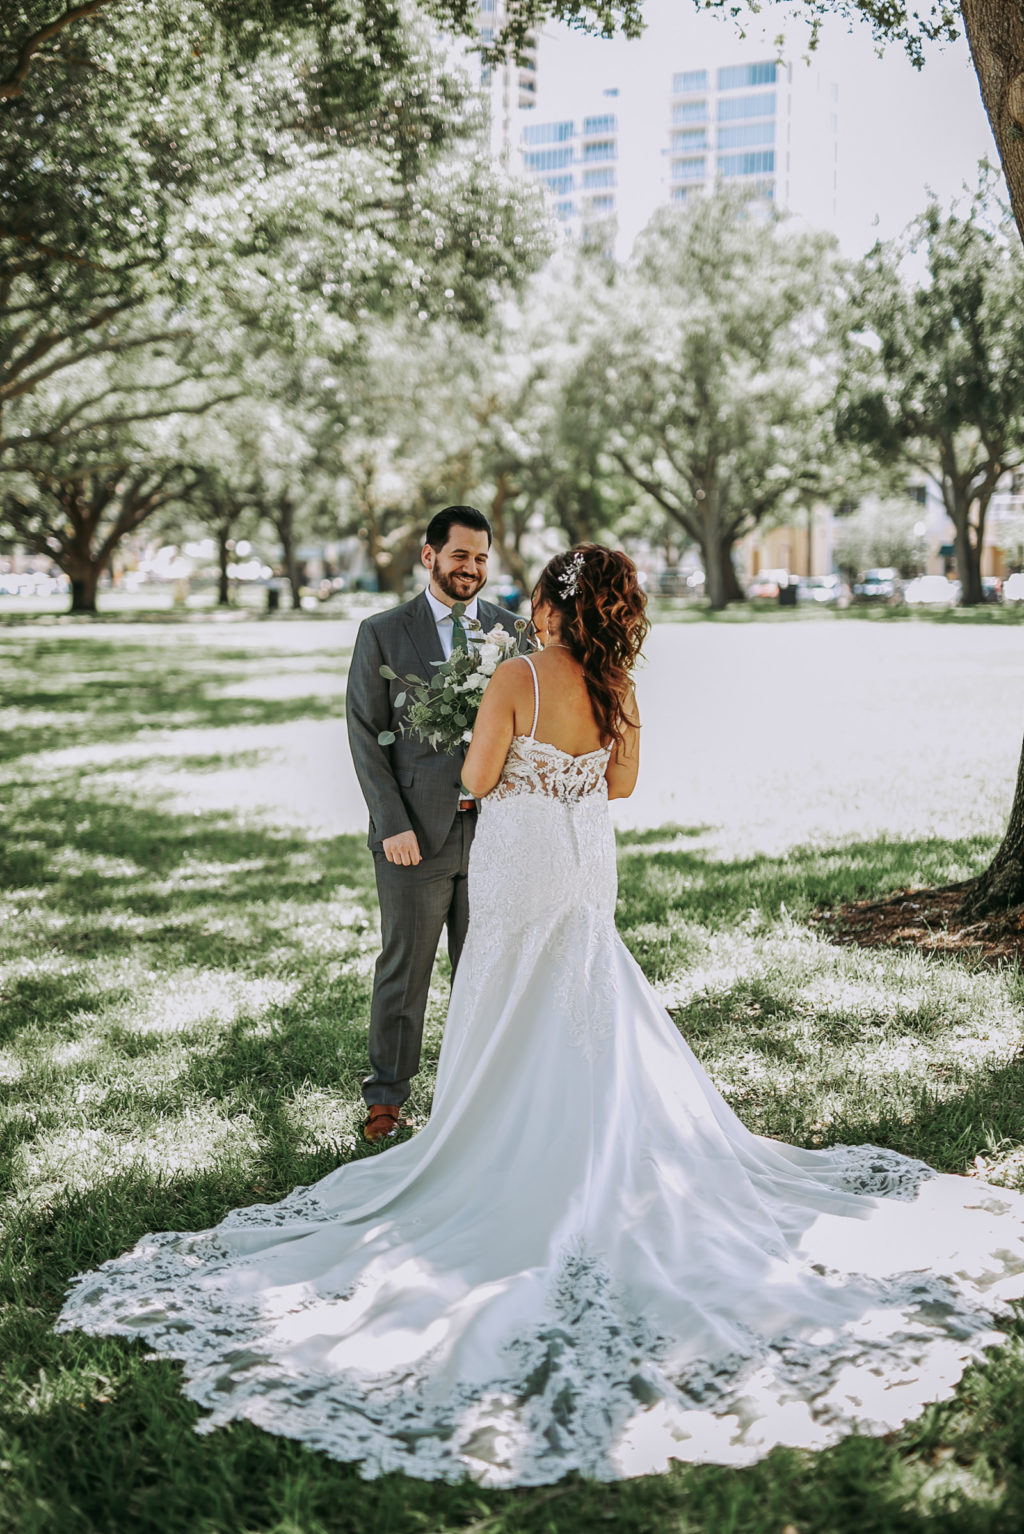 Outdoor Bride and Groom First Look Portrait | Groom Wearing Classic Charcoal Grey Suit with Green Tie | Lace Fit and Flare Mermaid Spaghetti Strap Wedding Dress Bridal Gown with Scallop Edge Lace Train Hem